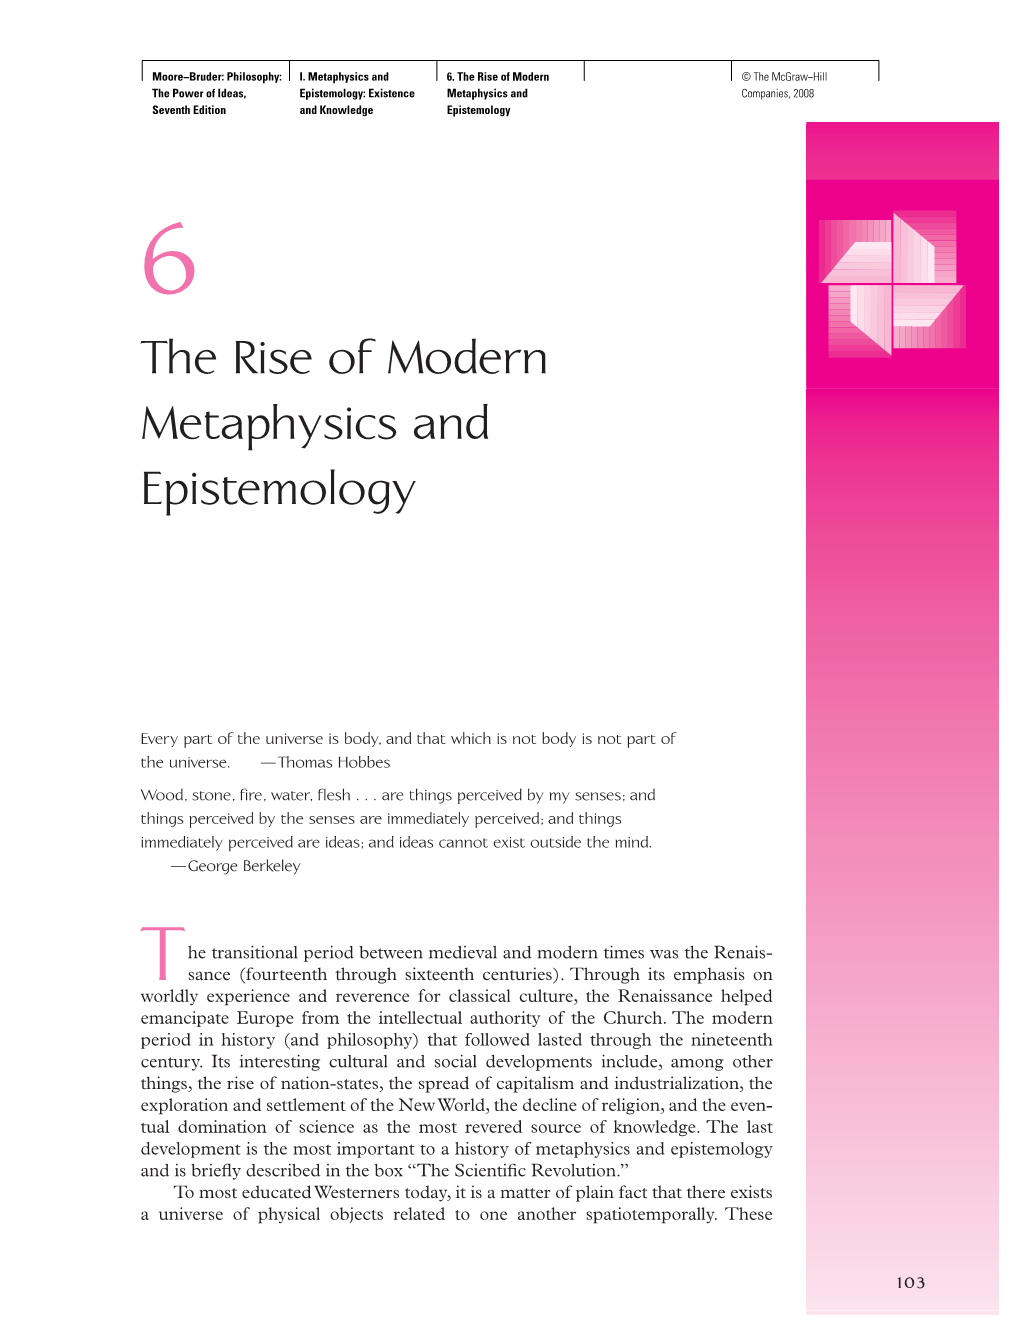 The Rise of Modern Metaphysics and Epistemology